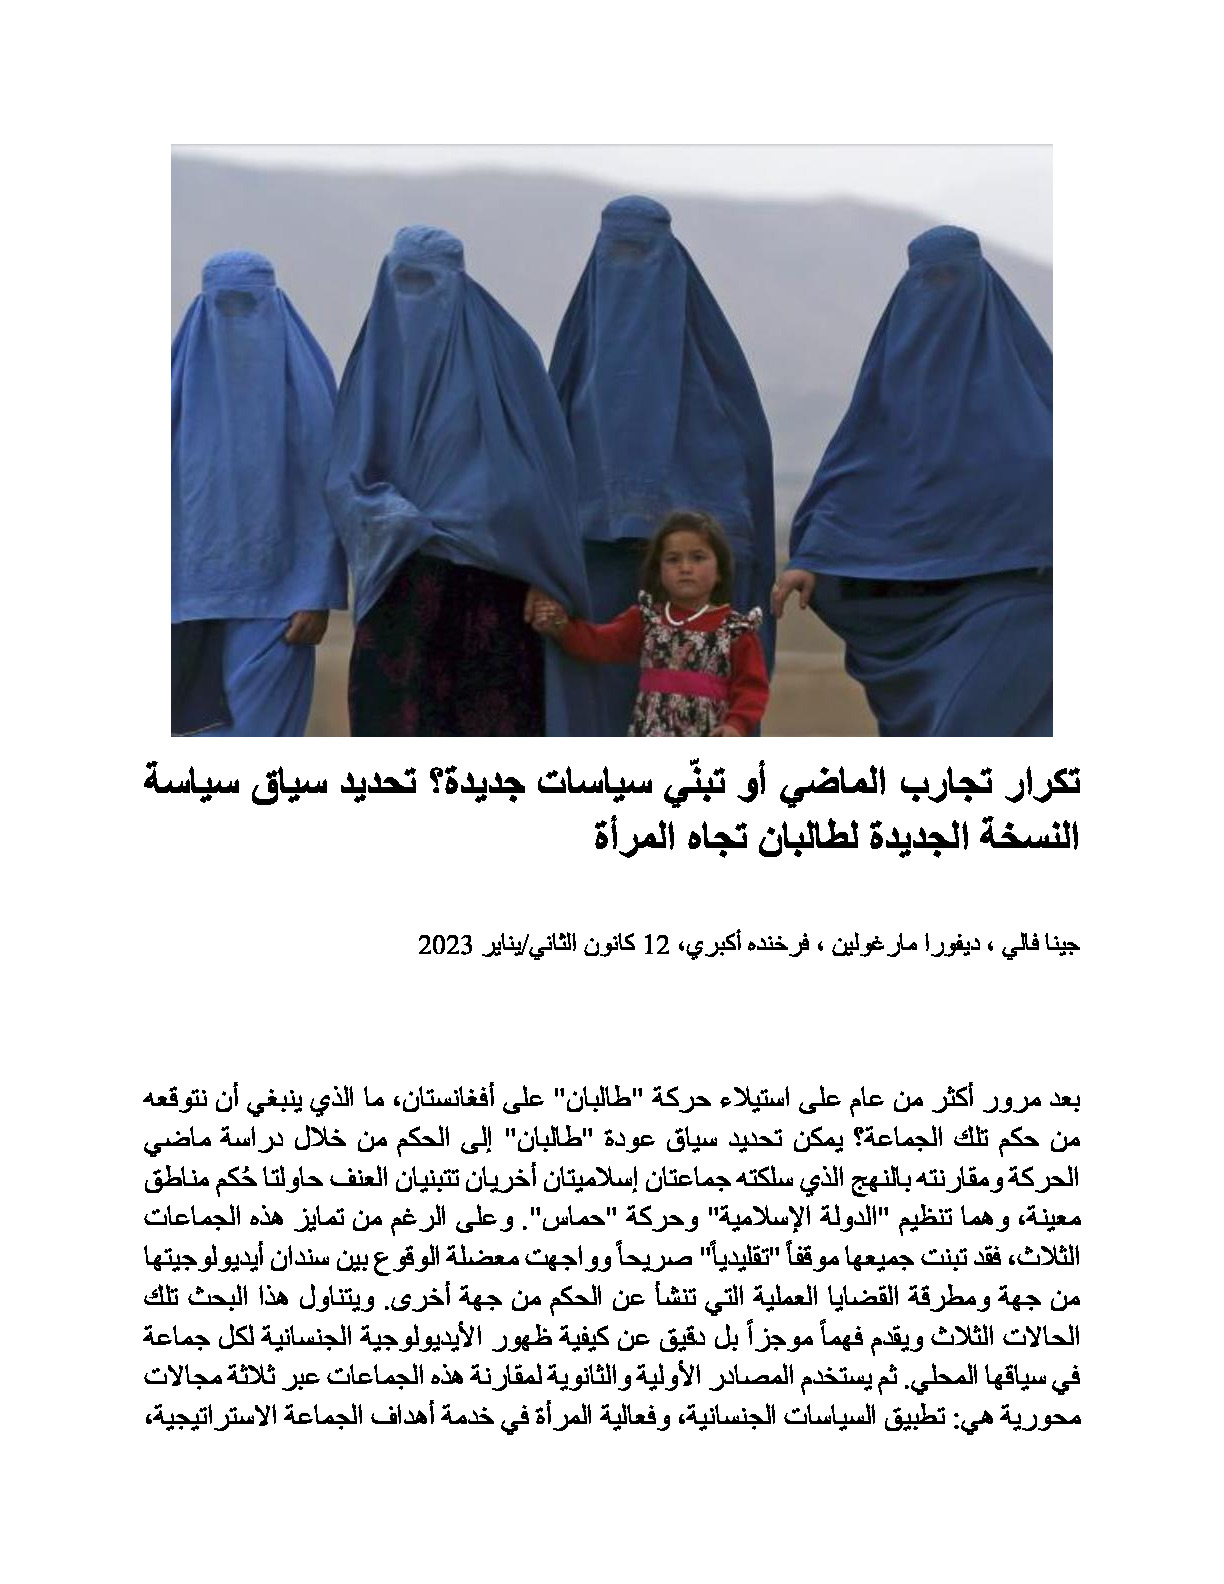 Original_Two_Original_Repeating the Past or Following Precedent_Contextualising the Taliban 2.0’s Governance of Women.pdf